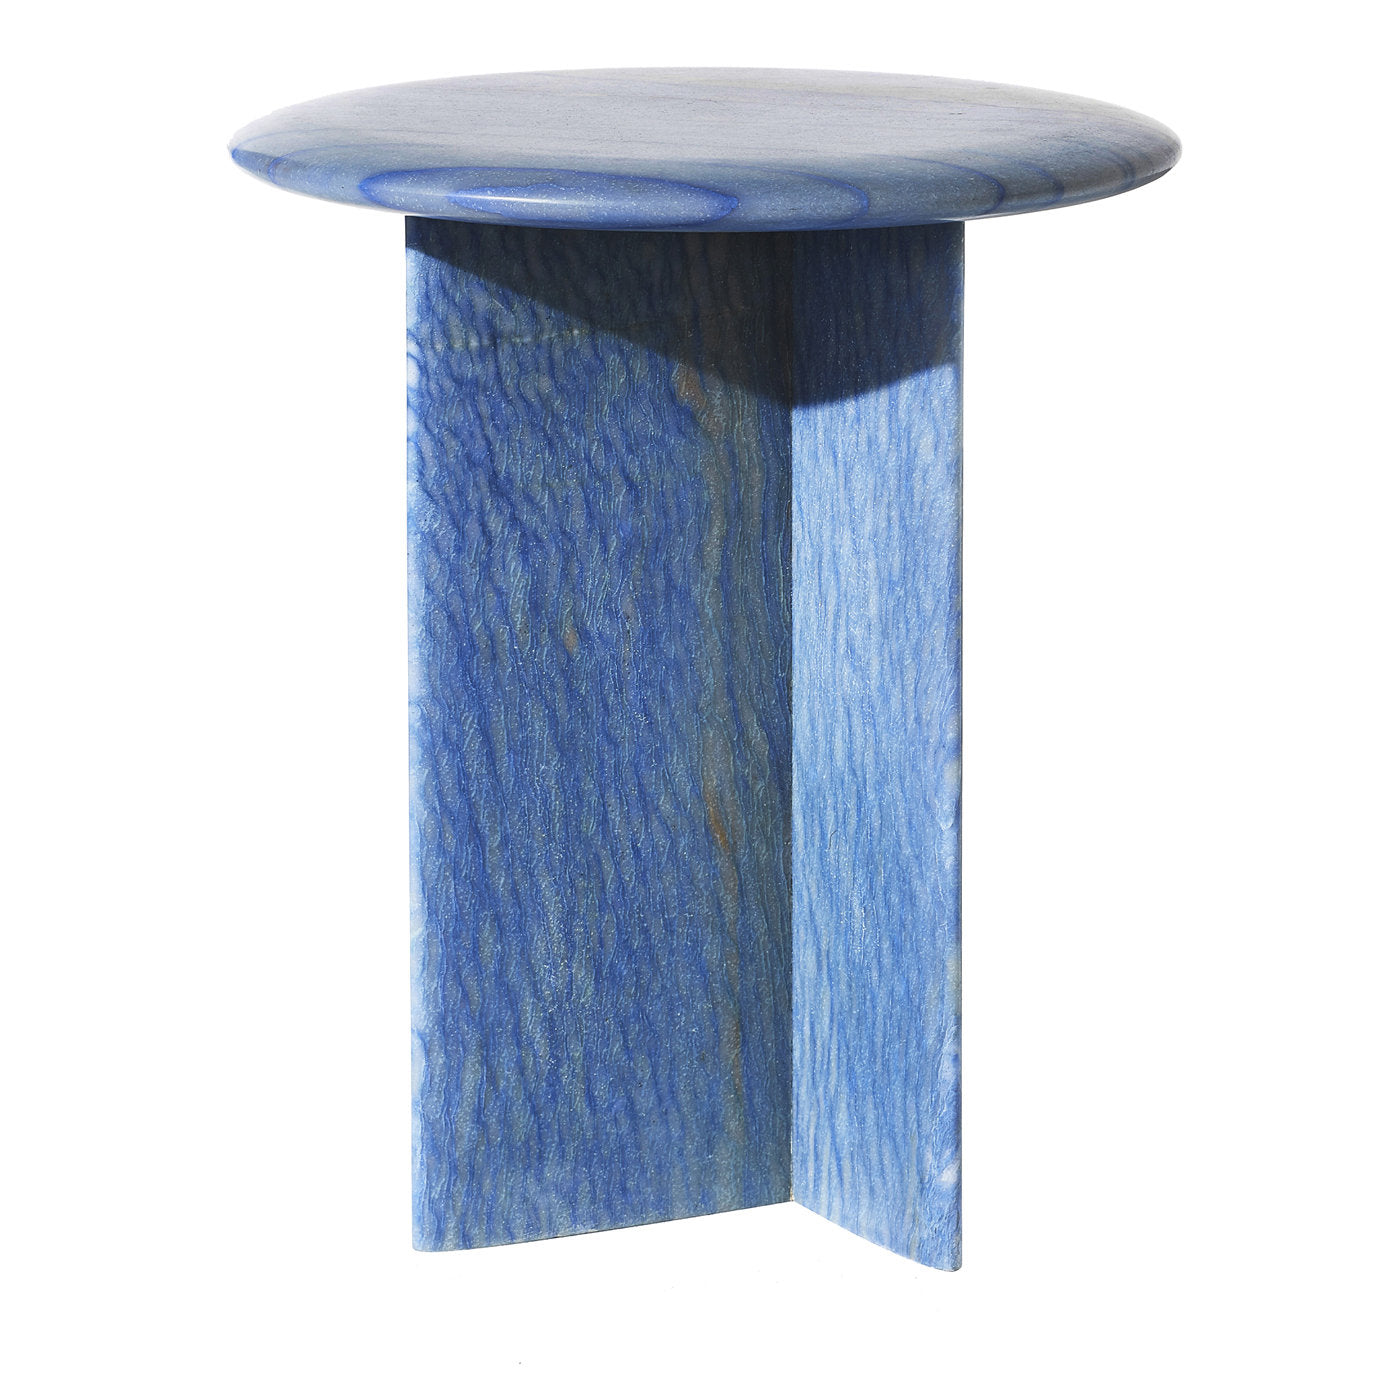 Papiro Blue Side Table by Patricia Urquiola - Main view